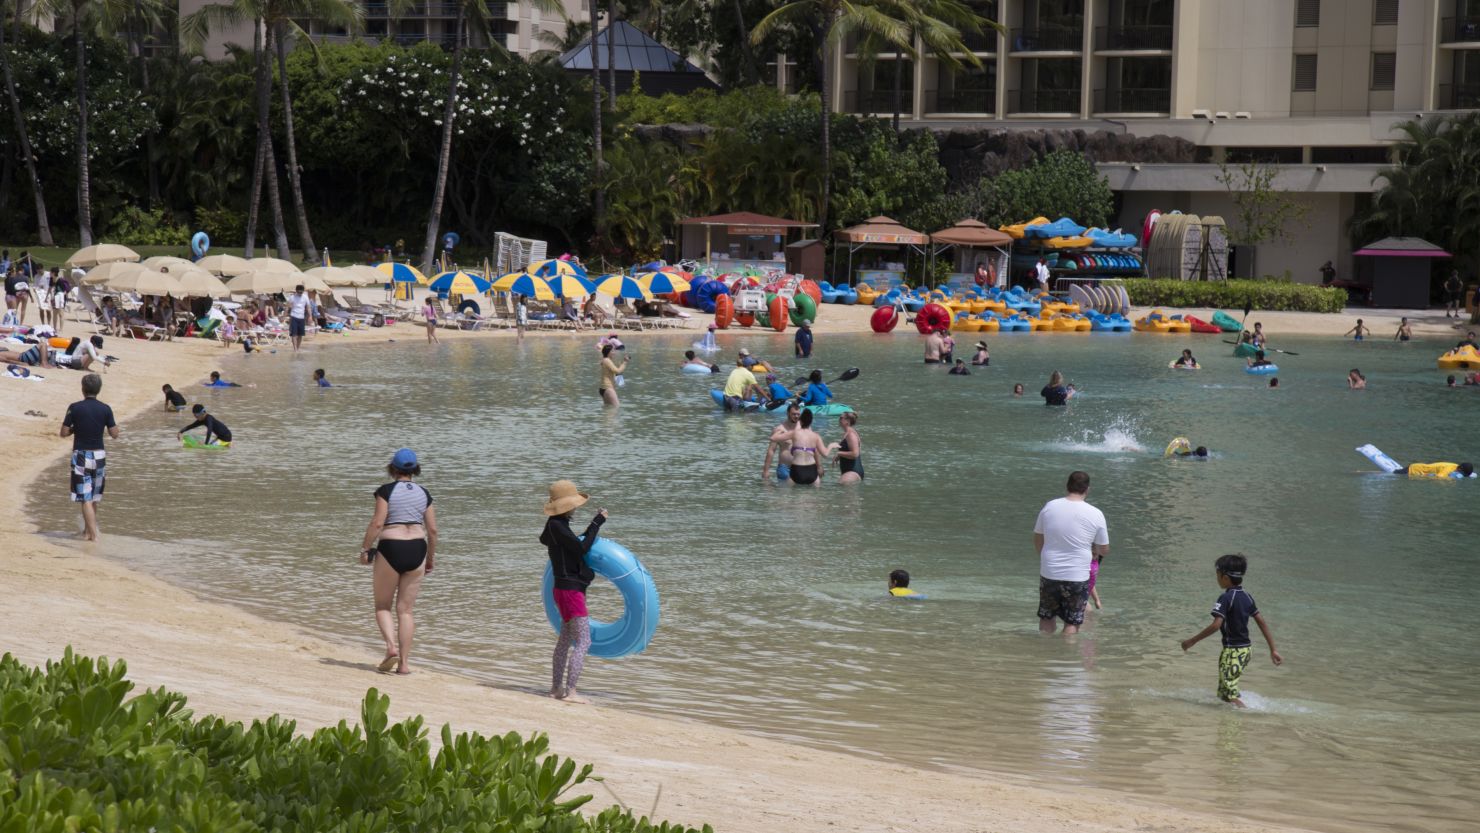 HONOLULU, HI - AUGUST 22:   With more than 270,000 visitors in Hawaii and the majority on Oahu, the tourists enjoy a gorgeous day at the beach unperturbed by Hurricane Lane's expected landfall in Waikiki in just two days as seen from the Hilton Hawaiian Village Resort's Lagoon & Beach on Wednesday, August 22, 2018 in Honolulu, Hawaii. Hurricane Lane is a high-end Category 4 hurricane and remains a threat to the entire island chain. (Photo by Kat Wade/Getty Images)